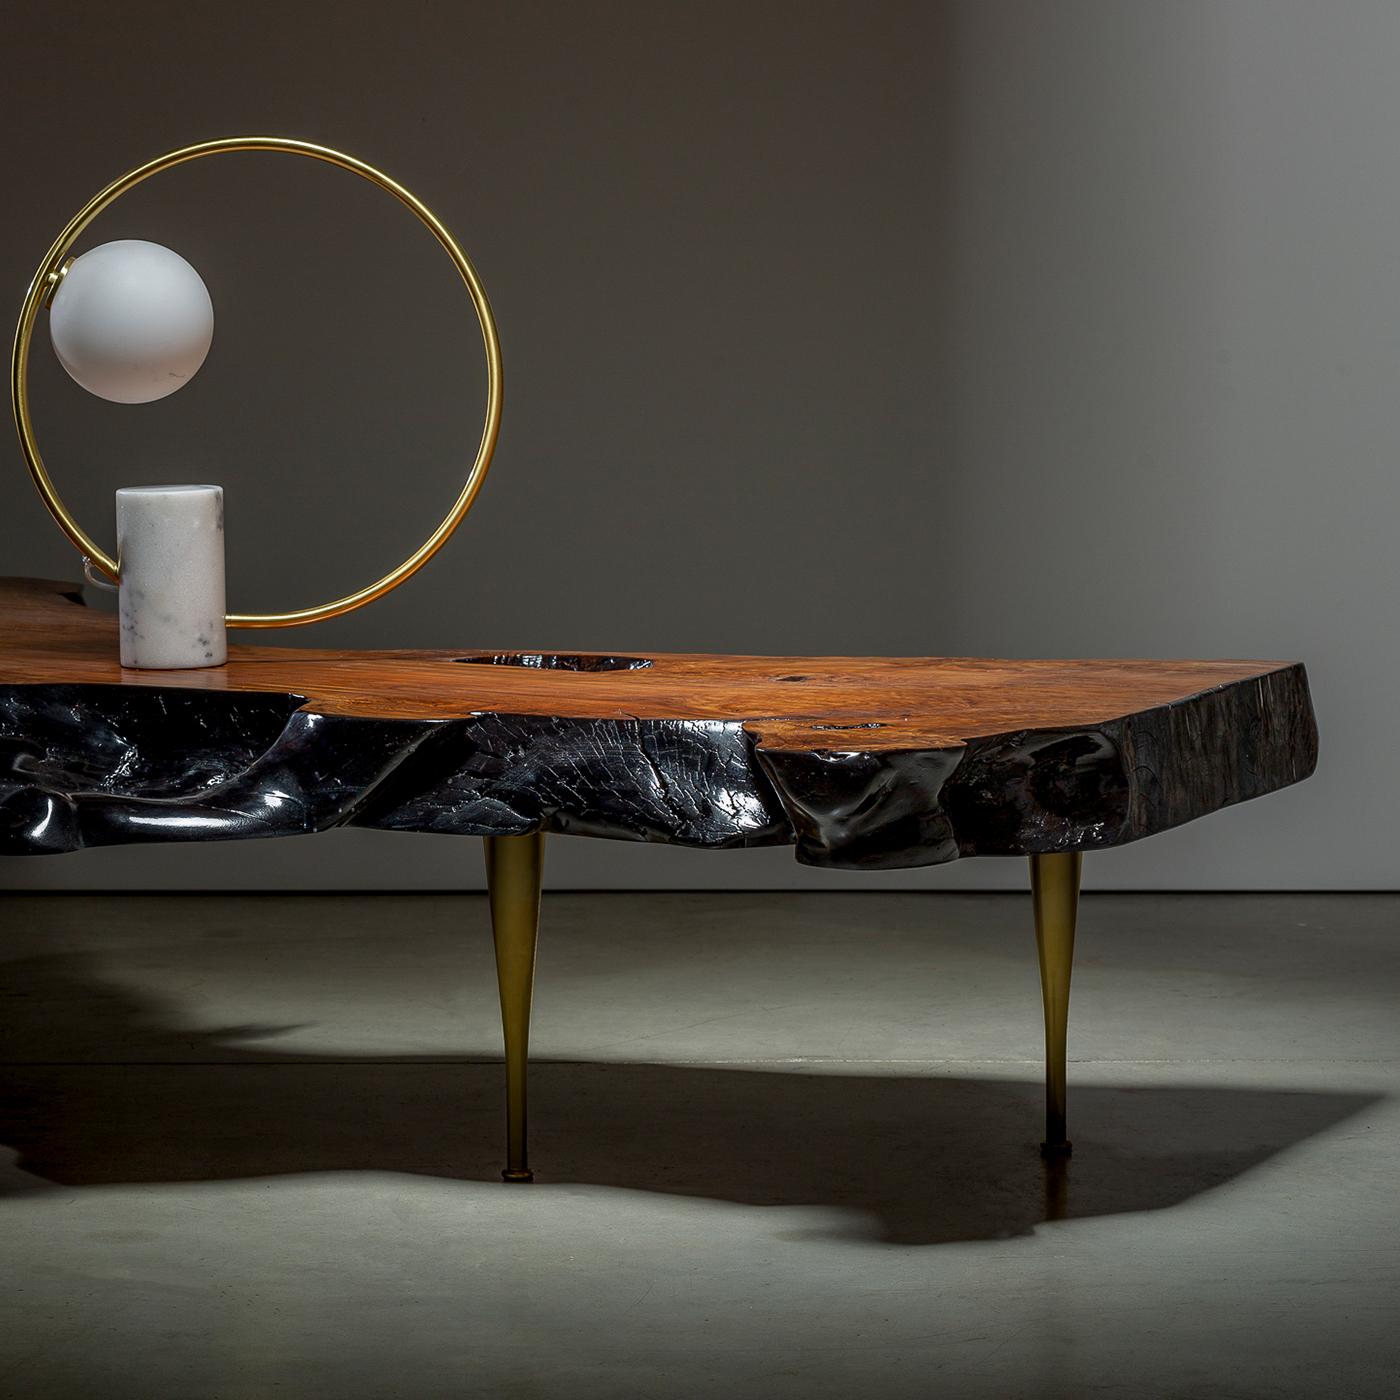 A thick and sinuous tabletop from a century-old olive stump is the outstanding element of this one-of-a-kind coffee table. Resting on a glamorous base of stiletto brass legs, it seduces with its irregular, dyed-black profiles shaped by nature and